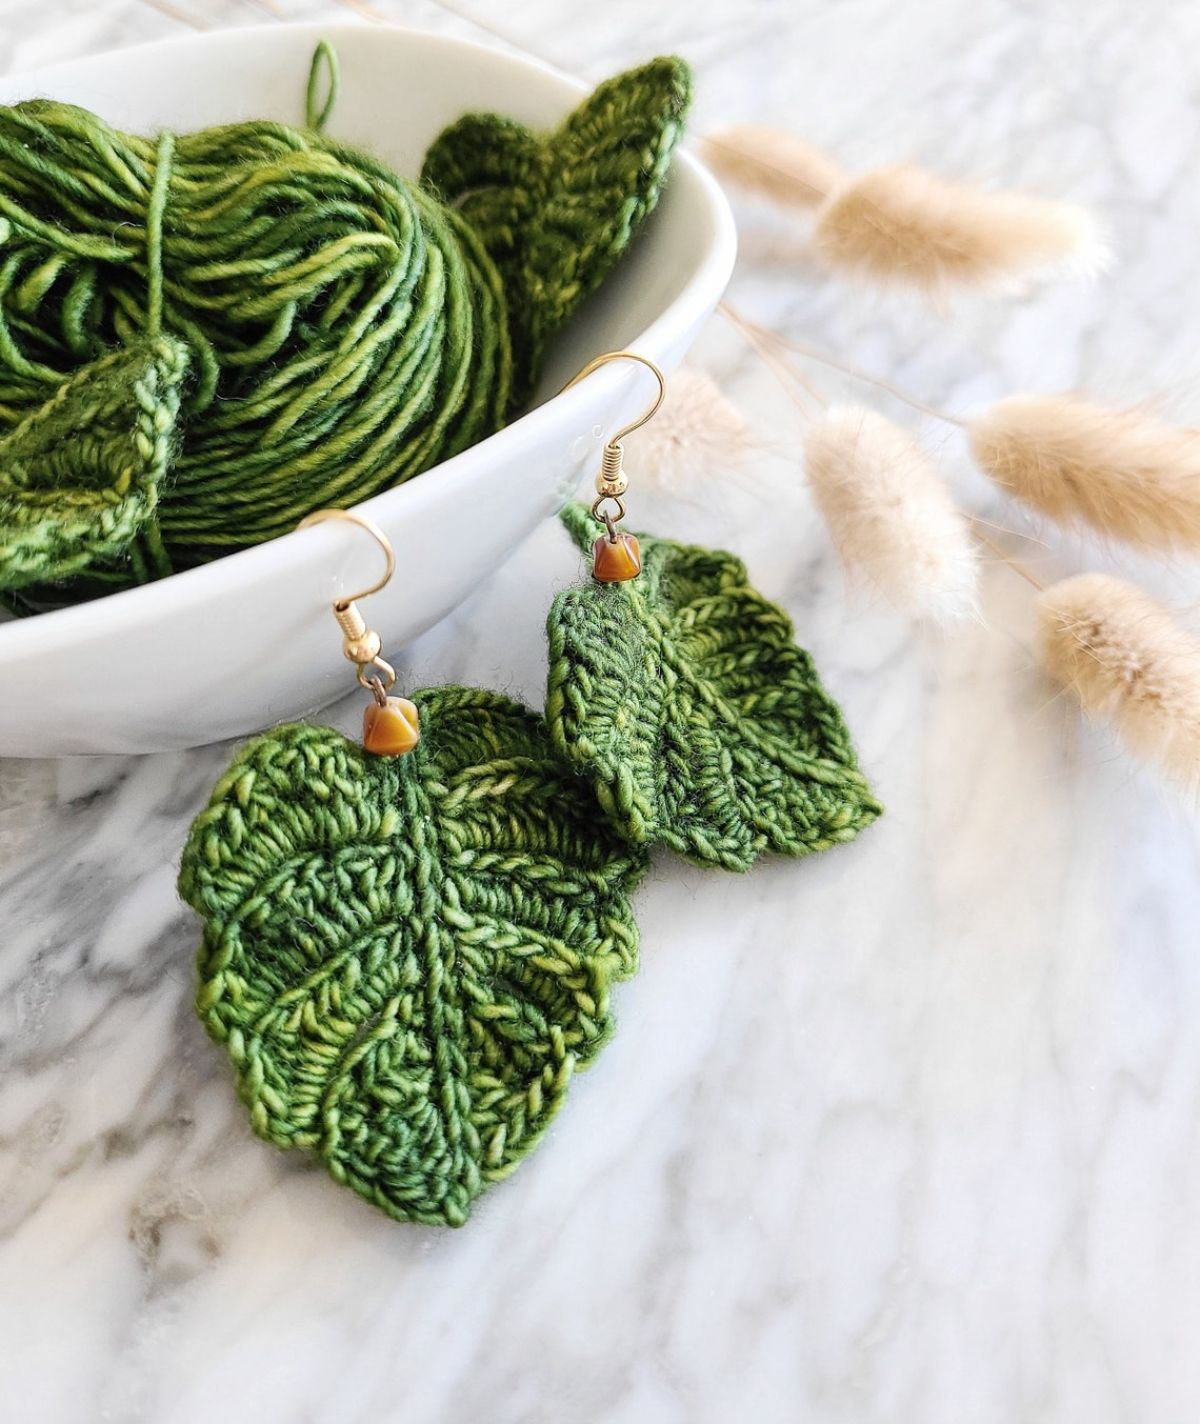 A small pair of green crochet monstera leaf earrings hanging from a white bowl filled with the same color yarn.